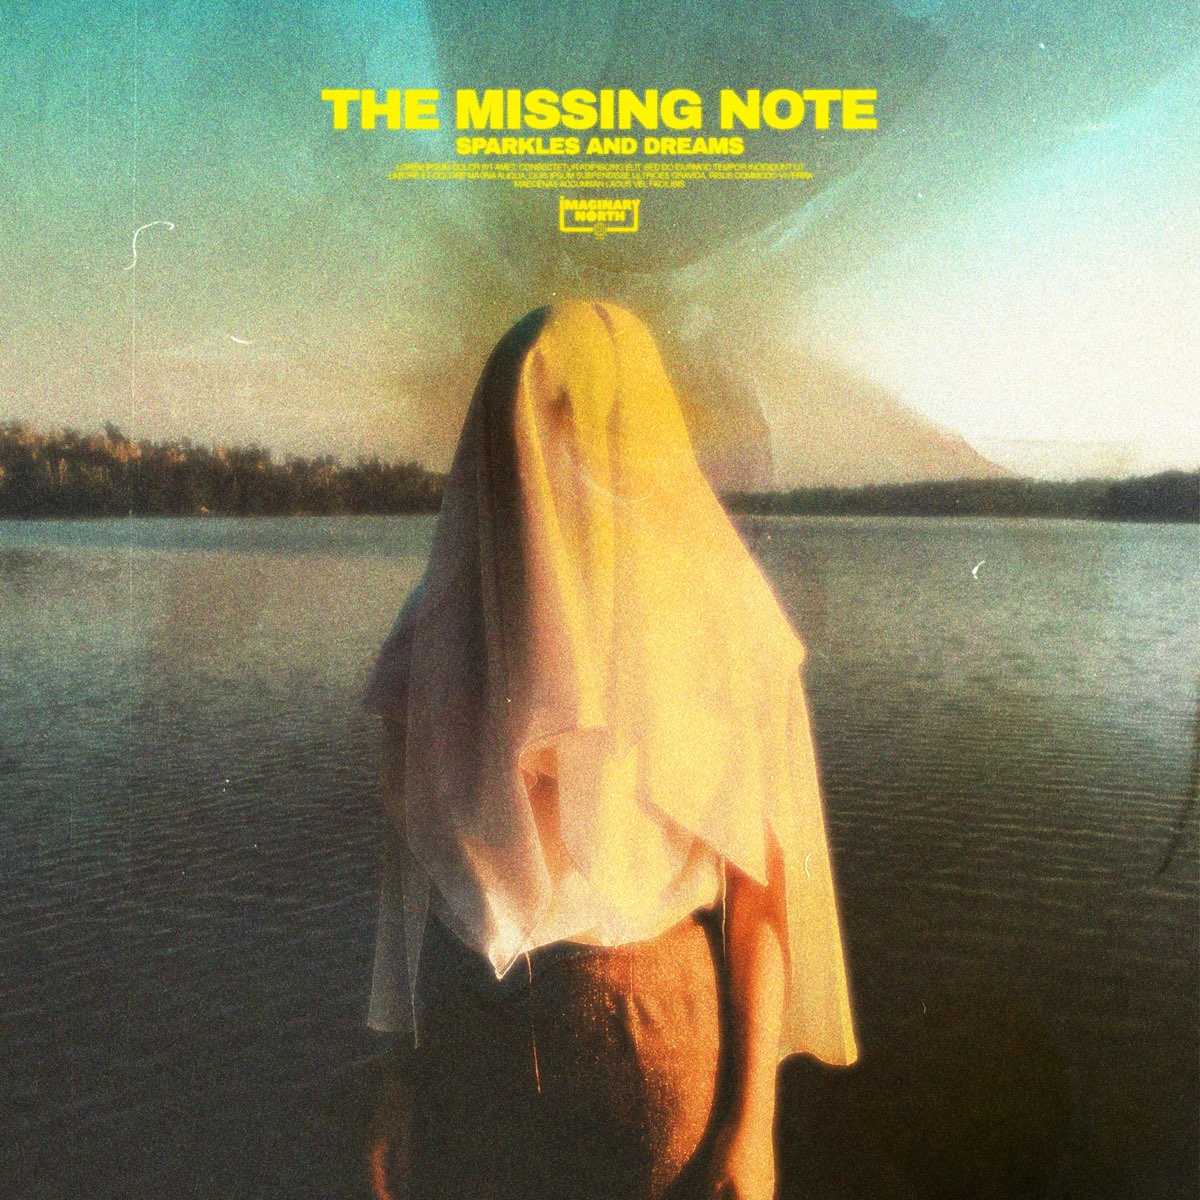 #nowplaying #themissingnote - Sparkles and Dreams #pacificnotions